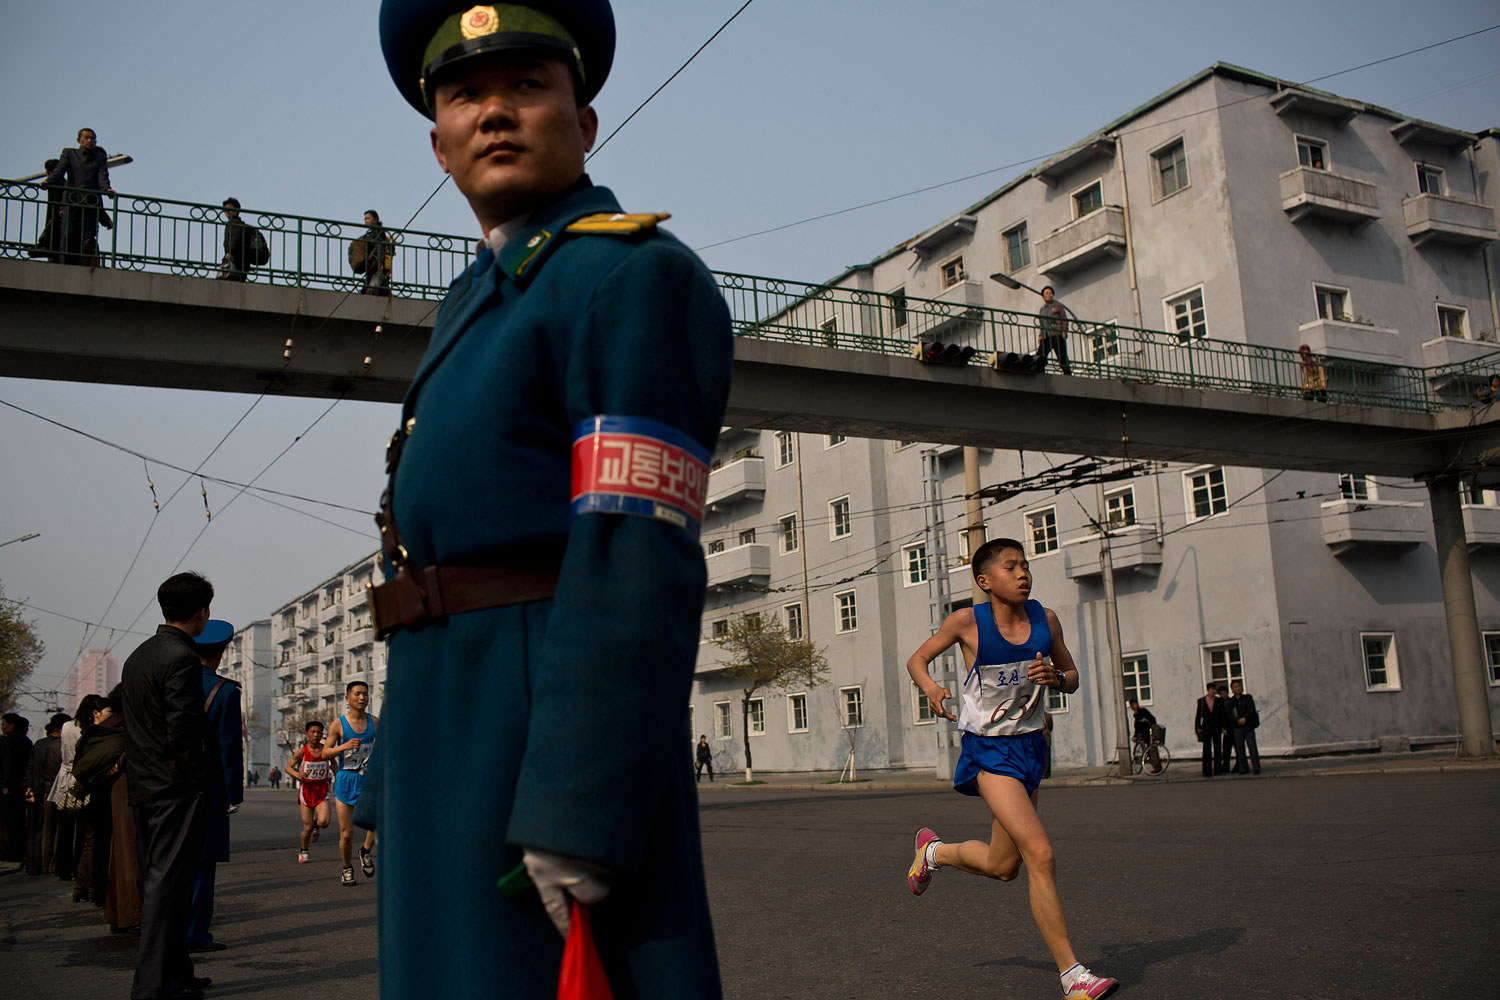 Runners pass under a pedestrian bridge in central Pyongyang during the running of the Mangyongdae Prize International Marathon in Pyongyang, on April 13, 2014.